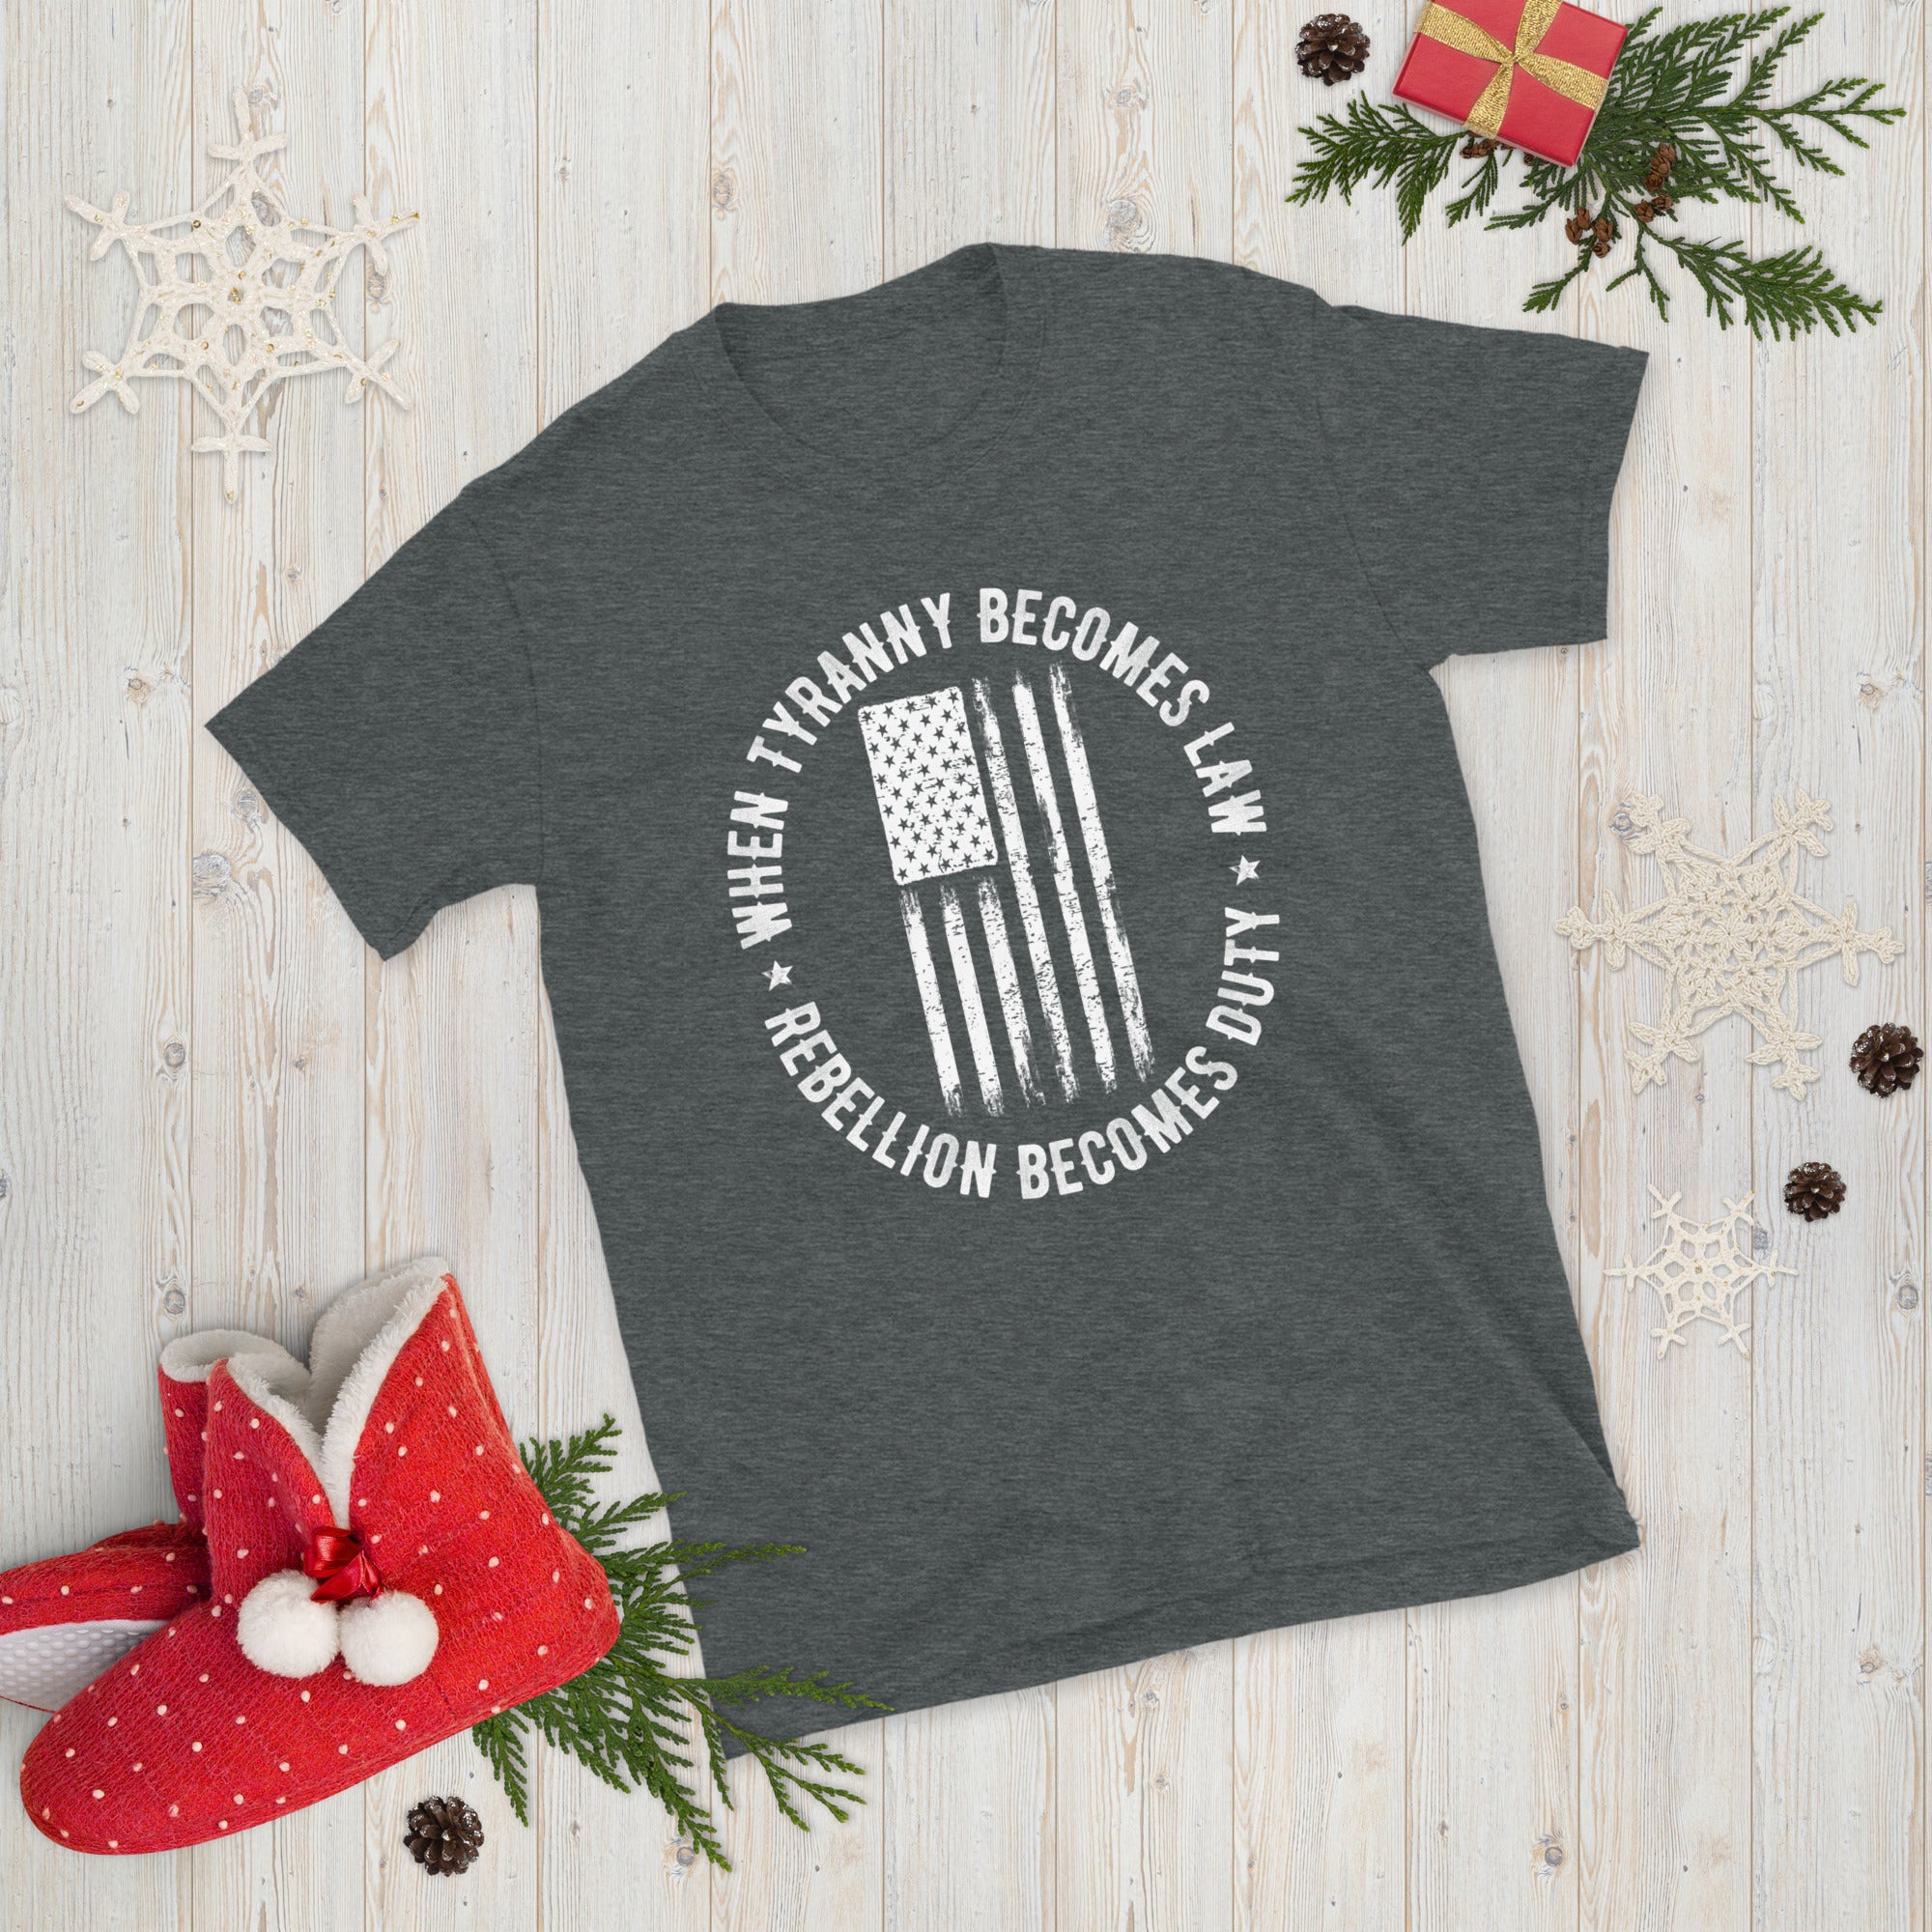 Tyranny Shirt, When Tyranny Becomes Law, Rebellion Becomes Duty, 1776 Shirt, Freedom Shirt, Thomas Jefferson Quote, Patriotic Gifts, Patriot - Madeinsea©